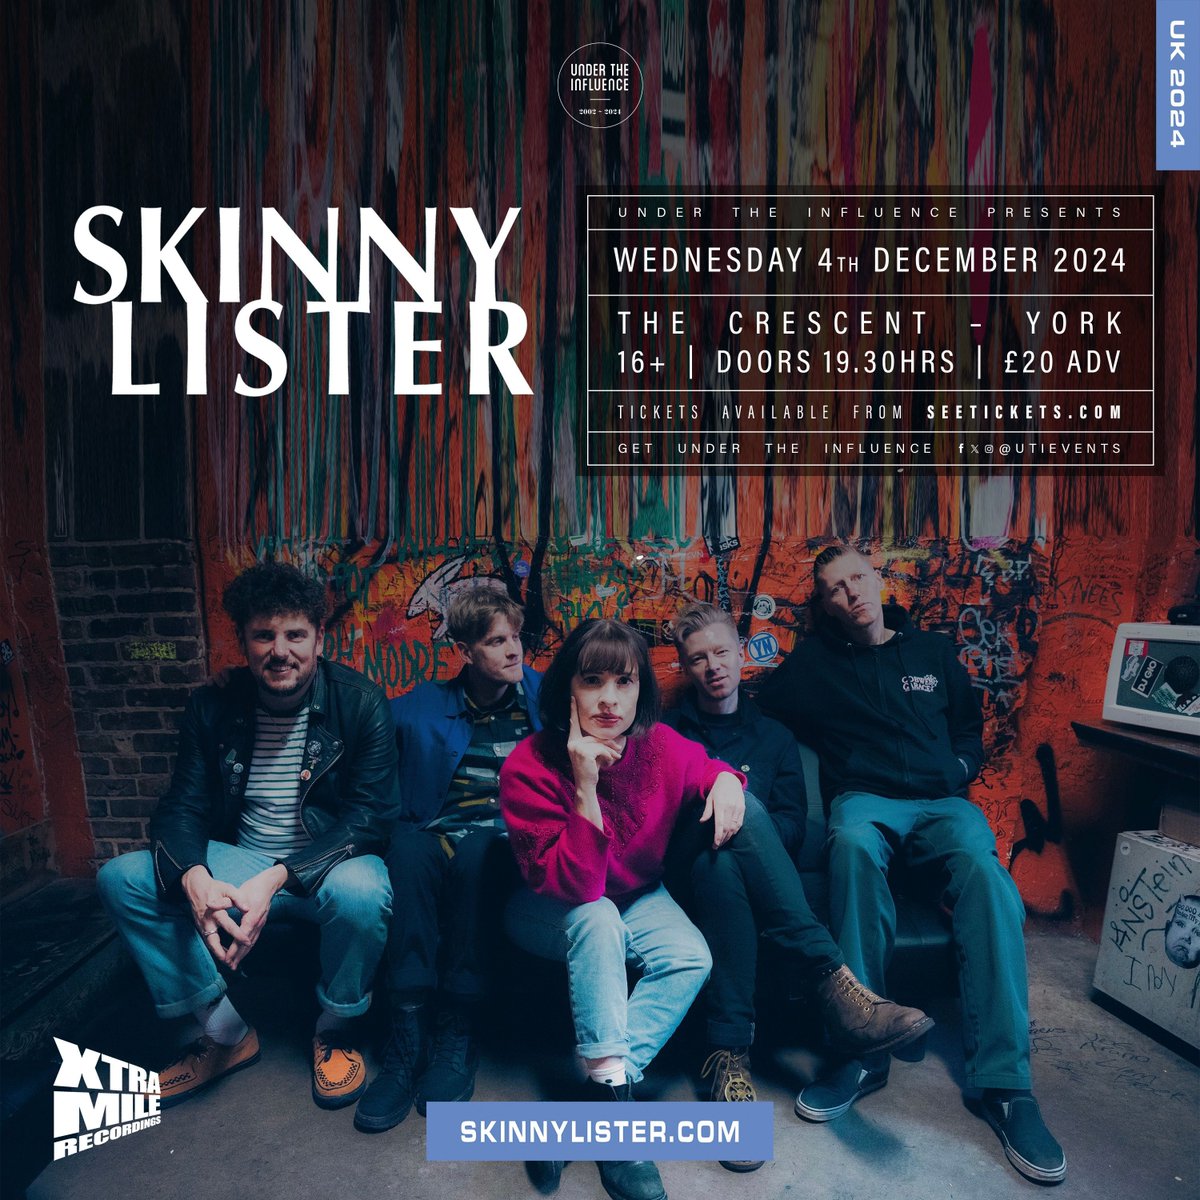 “…(a) kaleidoscope of high octane folk punk via Dexy’s and The Pogues” - Louder Than War @SkinnyLister brings an unforgettable night of energy and anthems to @TheCrescentYork on Wednesday 4th December 🎟 book tickets: bit.ly/SkinnyListerYo…